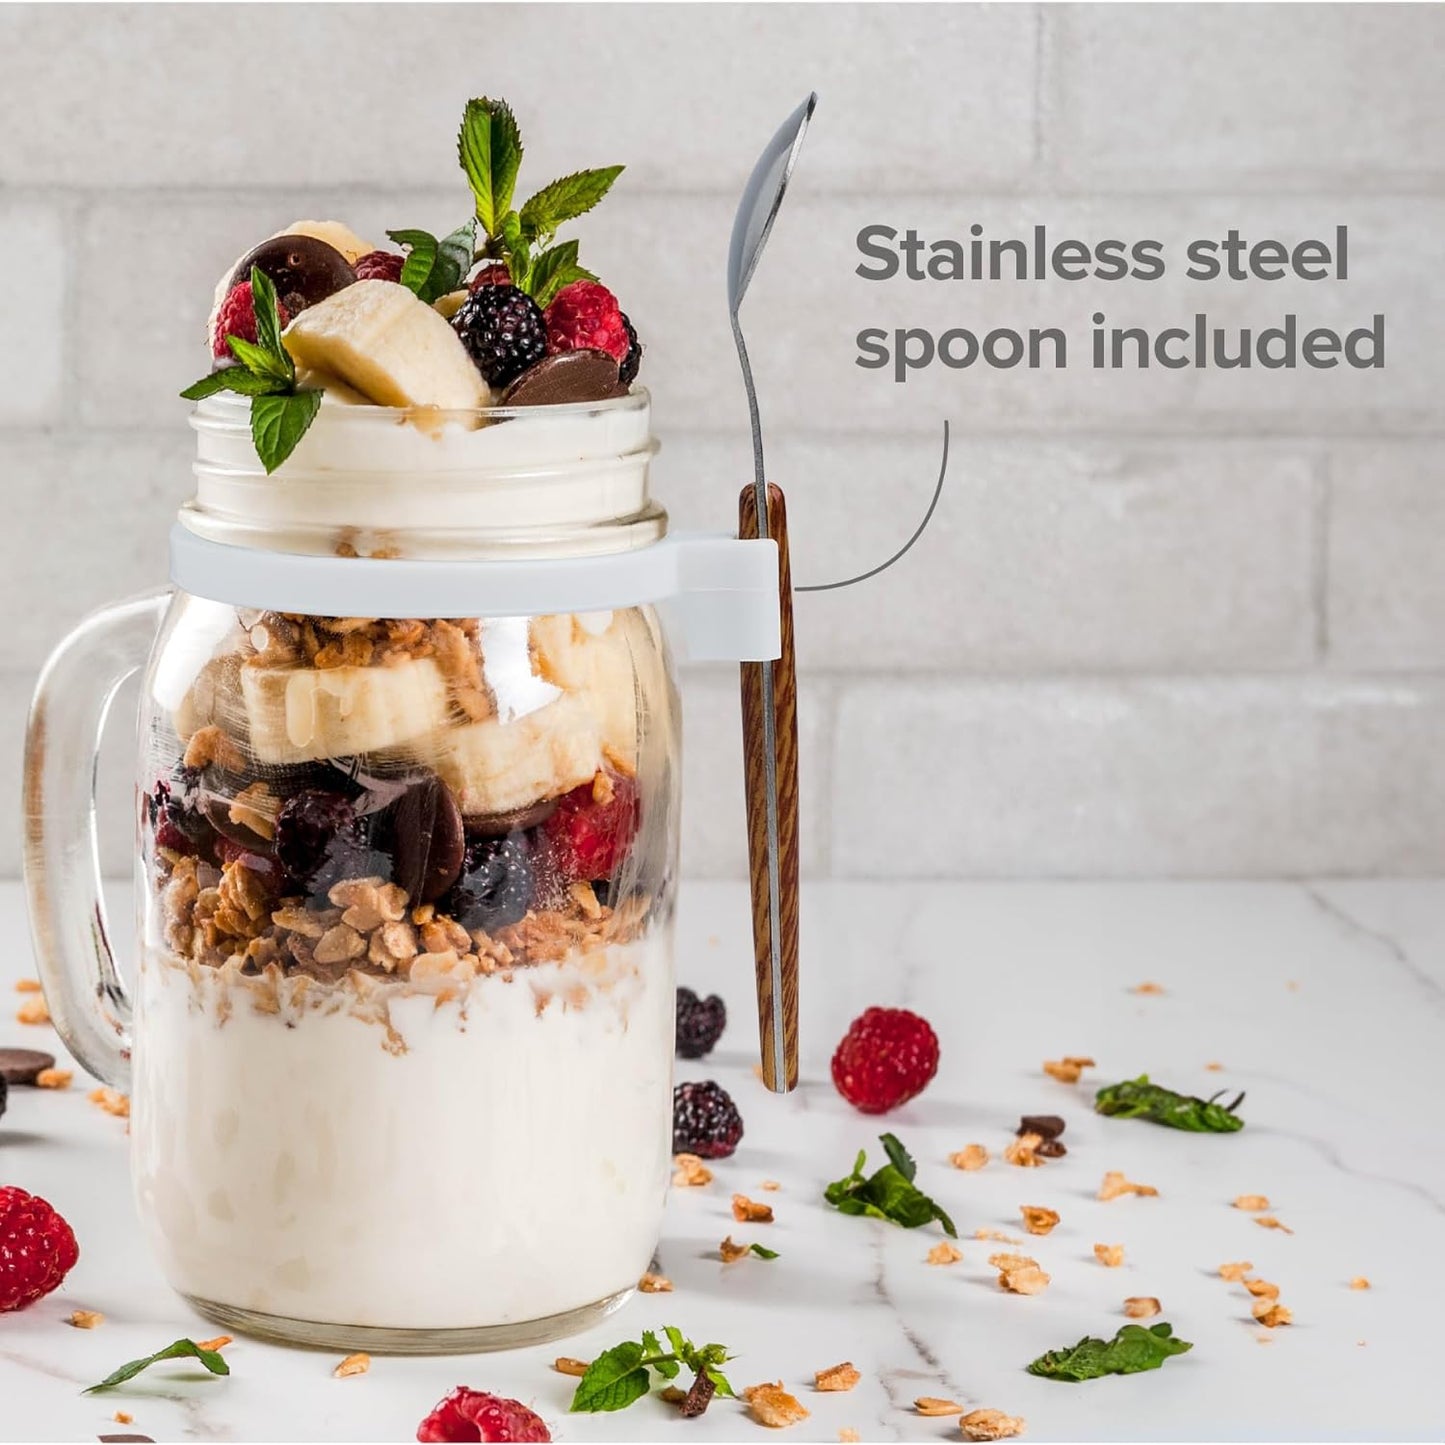 a jar of yogurt with fruit and berries with text: 'Stainless steel spoon included'